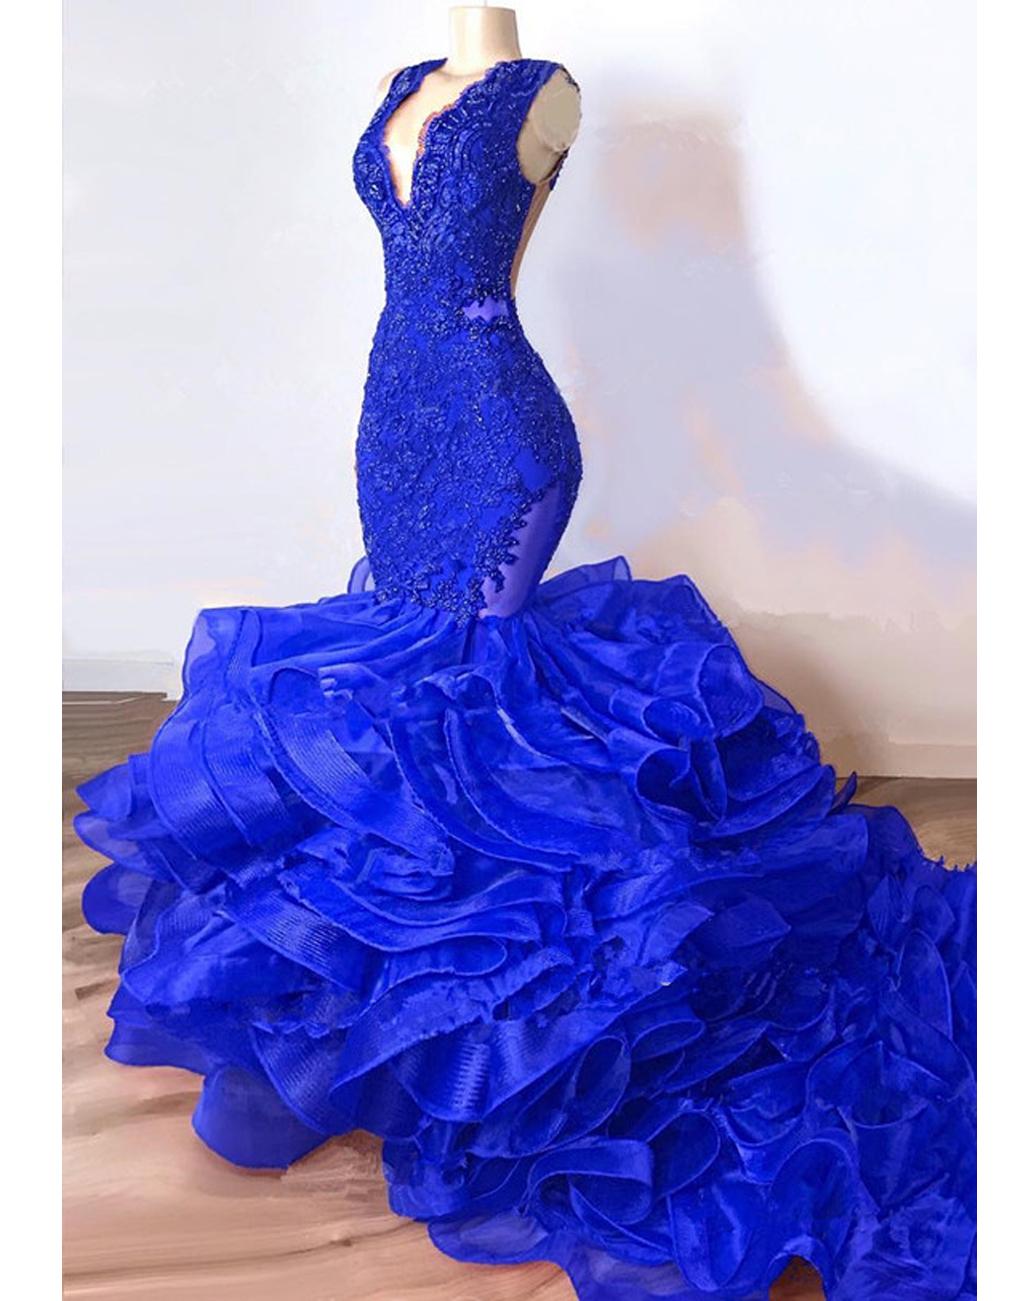 Gorgeous Royal Blue Ruffles Mermaid Prom Dresses 2021 Sexy Sheer Lace ...